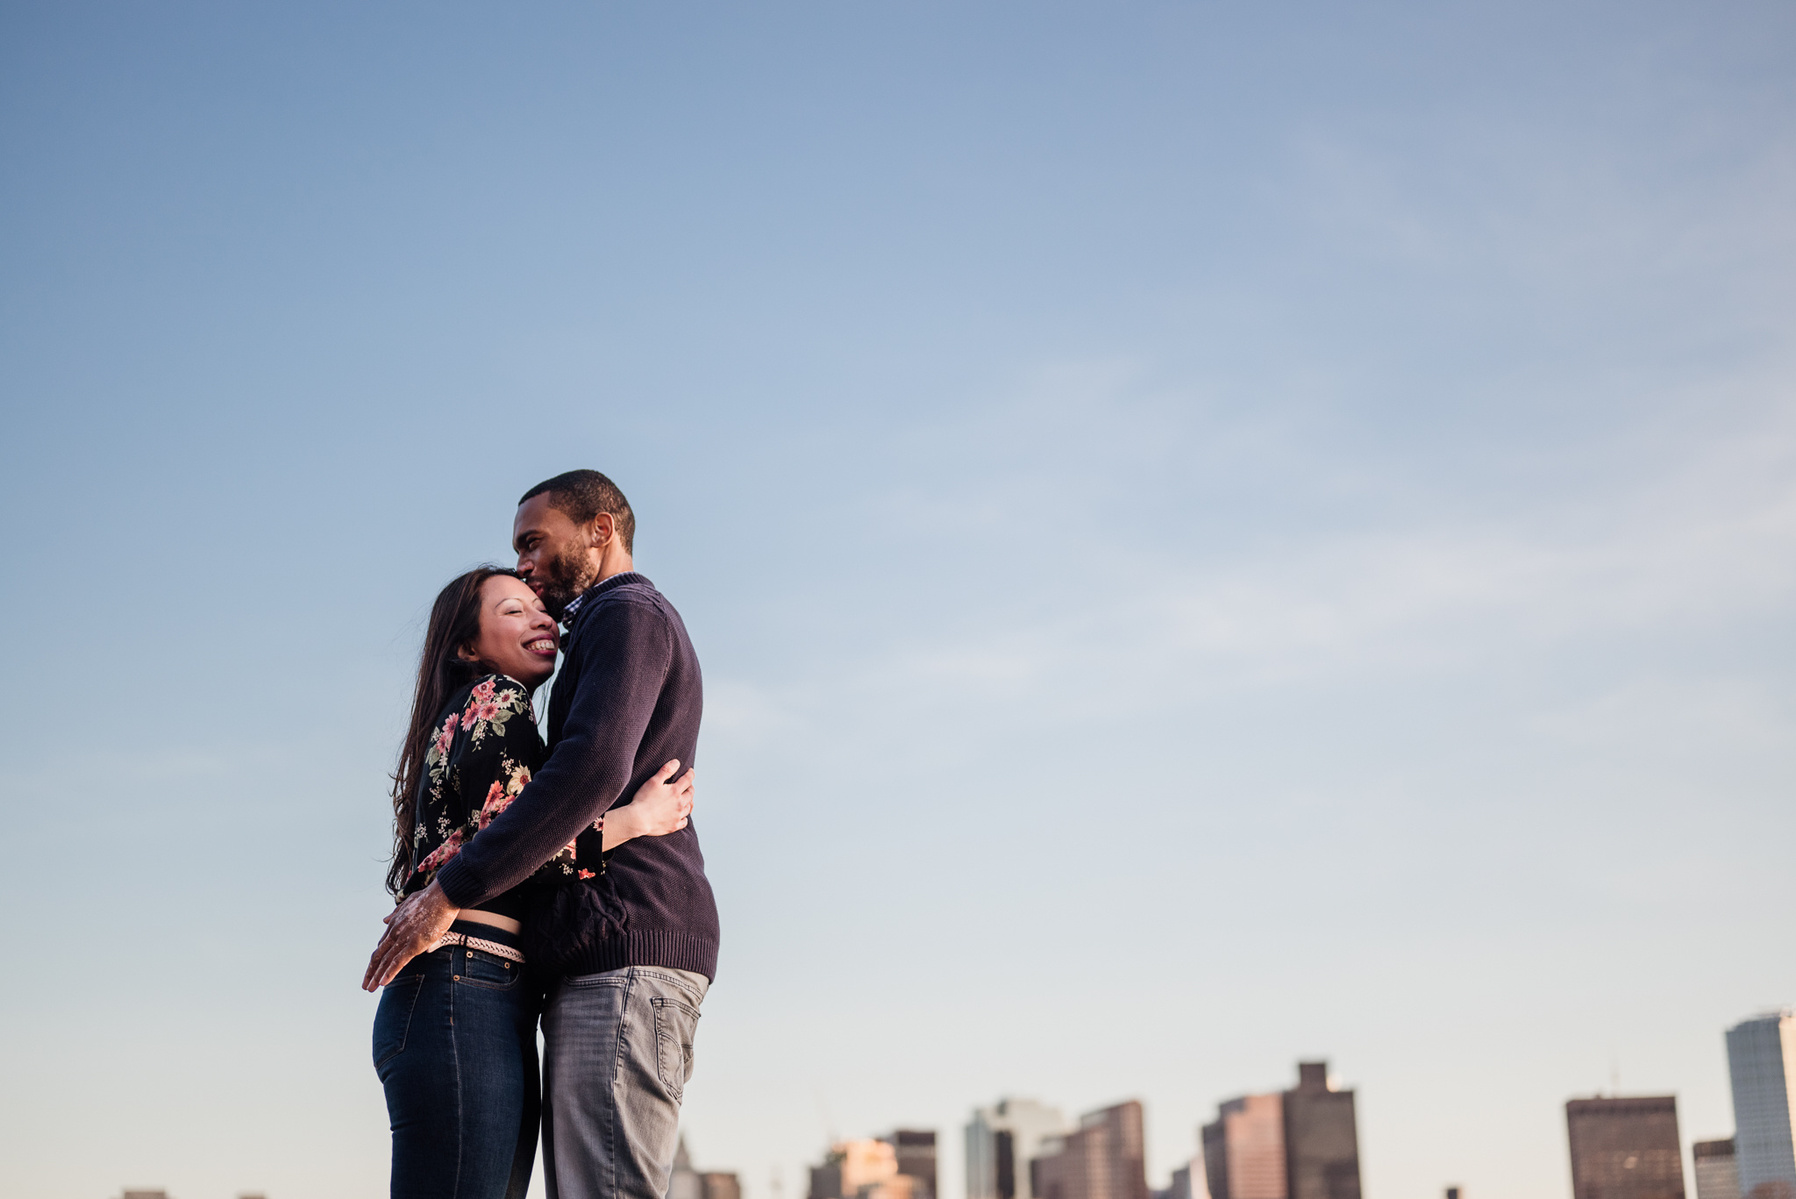 A couples embraces at sunset in front of the boston skyline